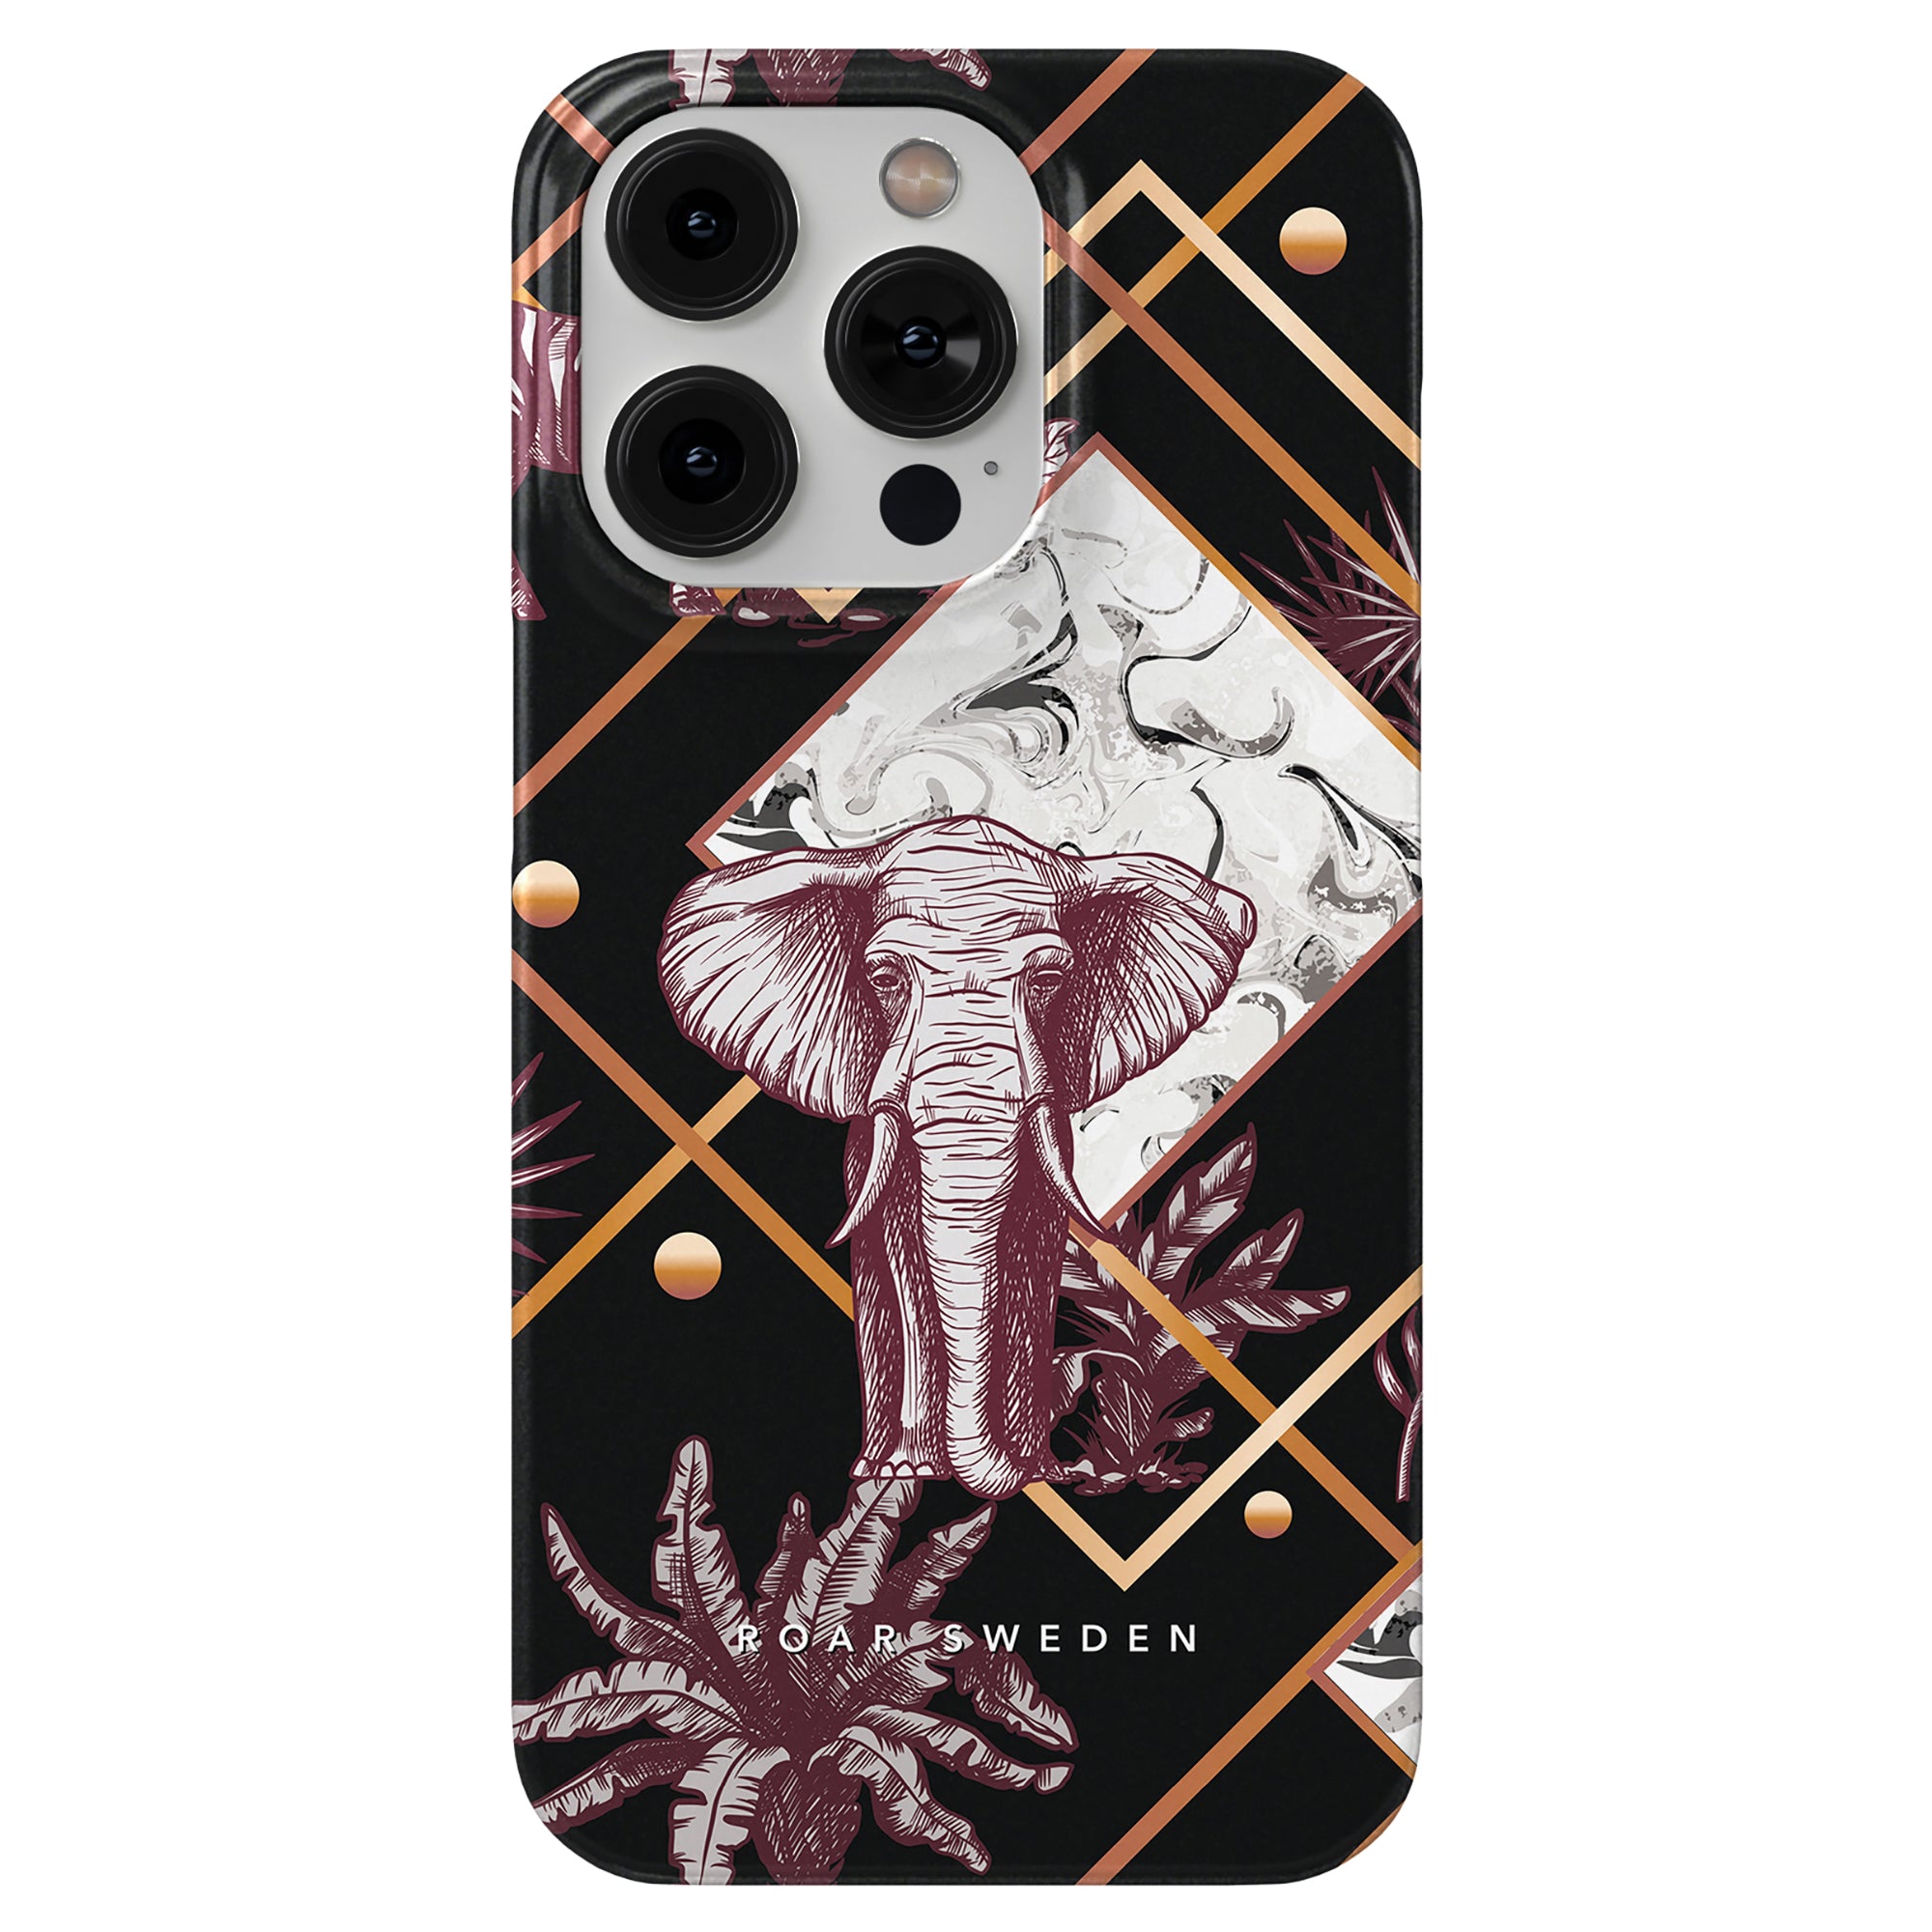 A Savanna - Slim case featuring an elephant illustration on a background of palm trees.